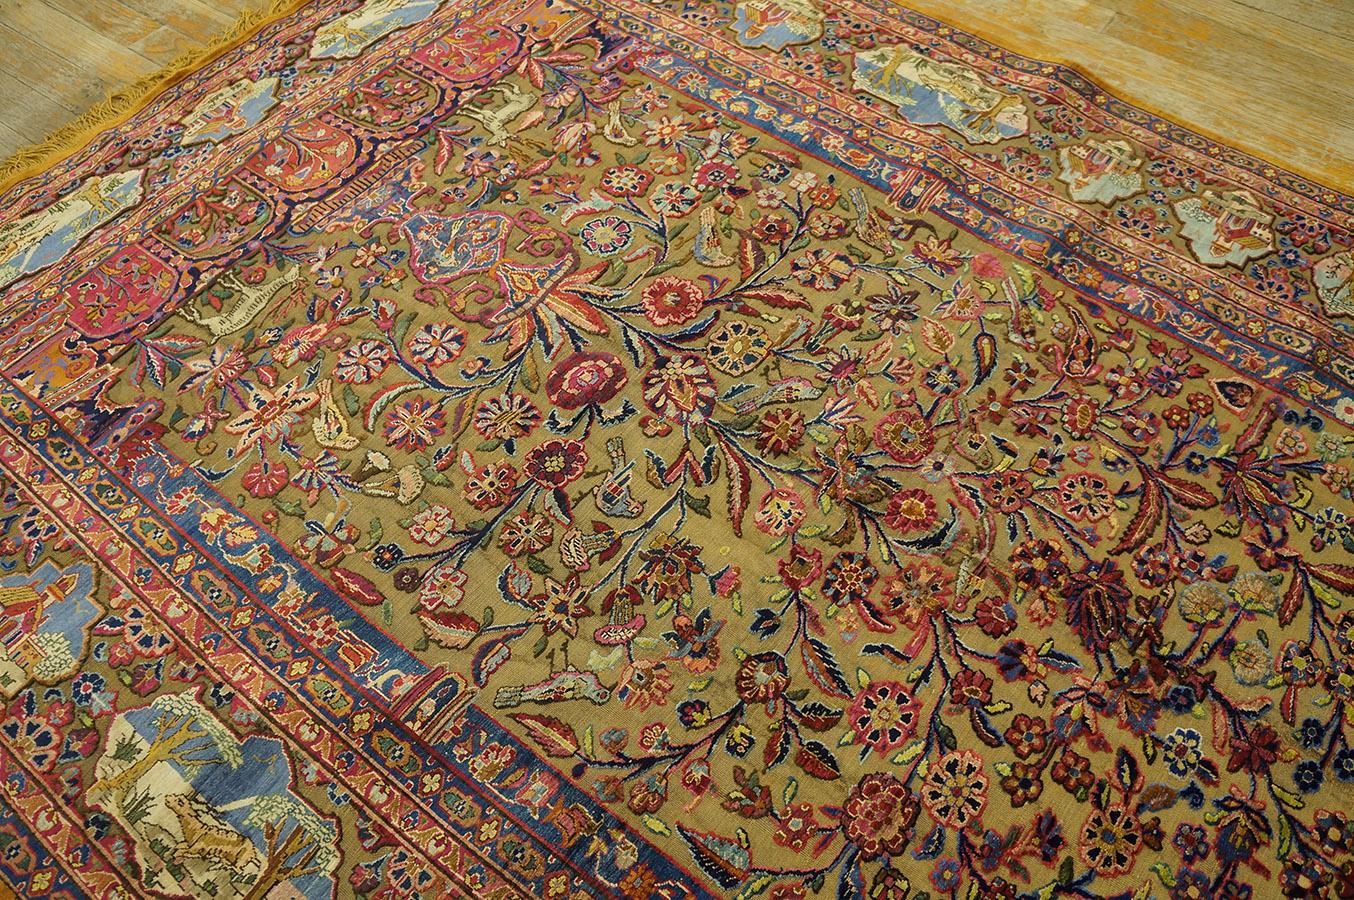 Hand-Knotted Early 20th Century Silk & Metallic Threads Souf Kashan Carpet (4' 3'' x 6' 3'') For Sale